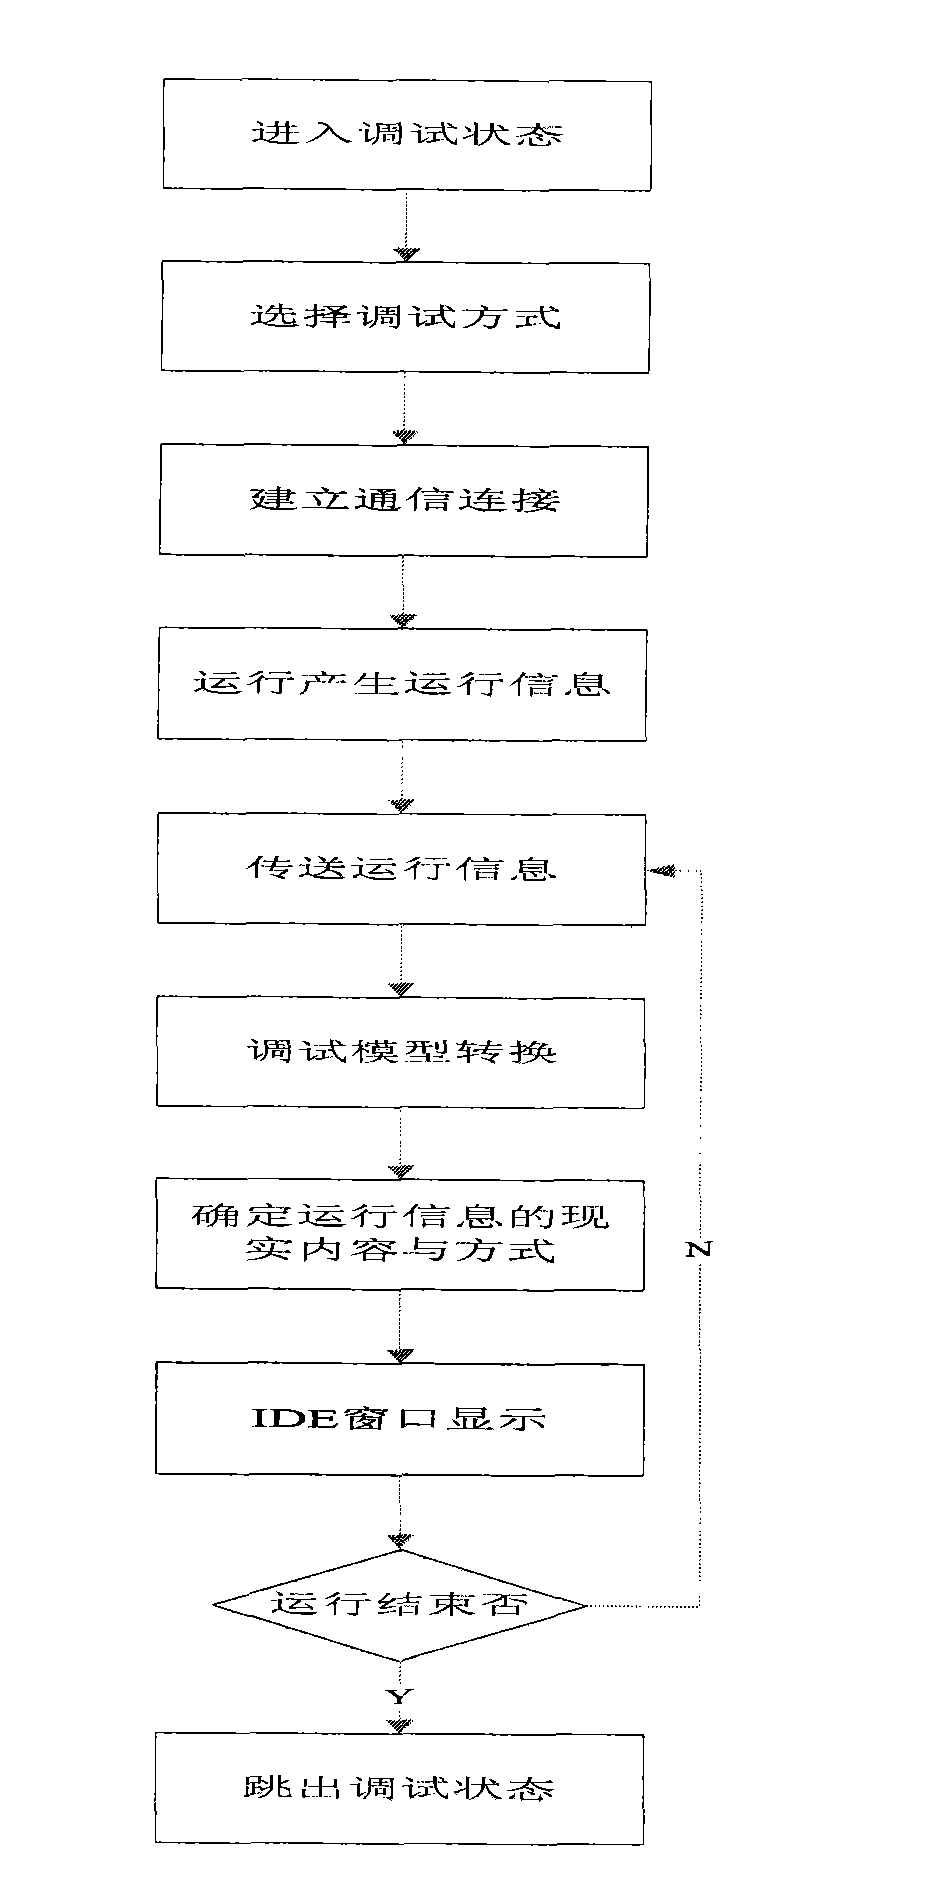 Method for debugging and realizing services in telecom value added service development environment